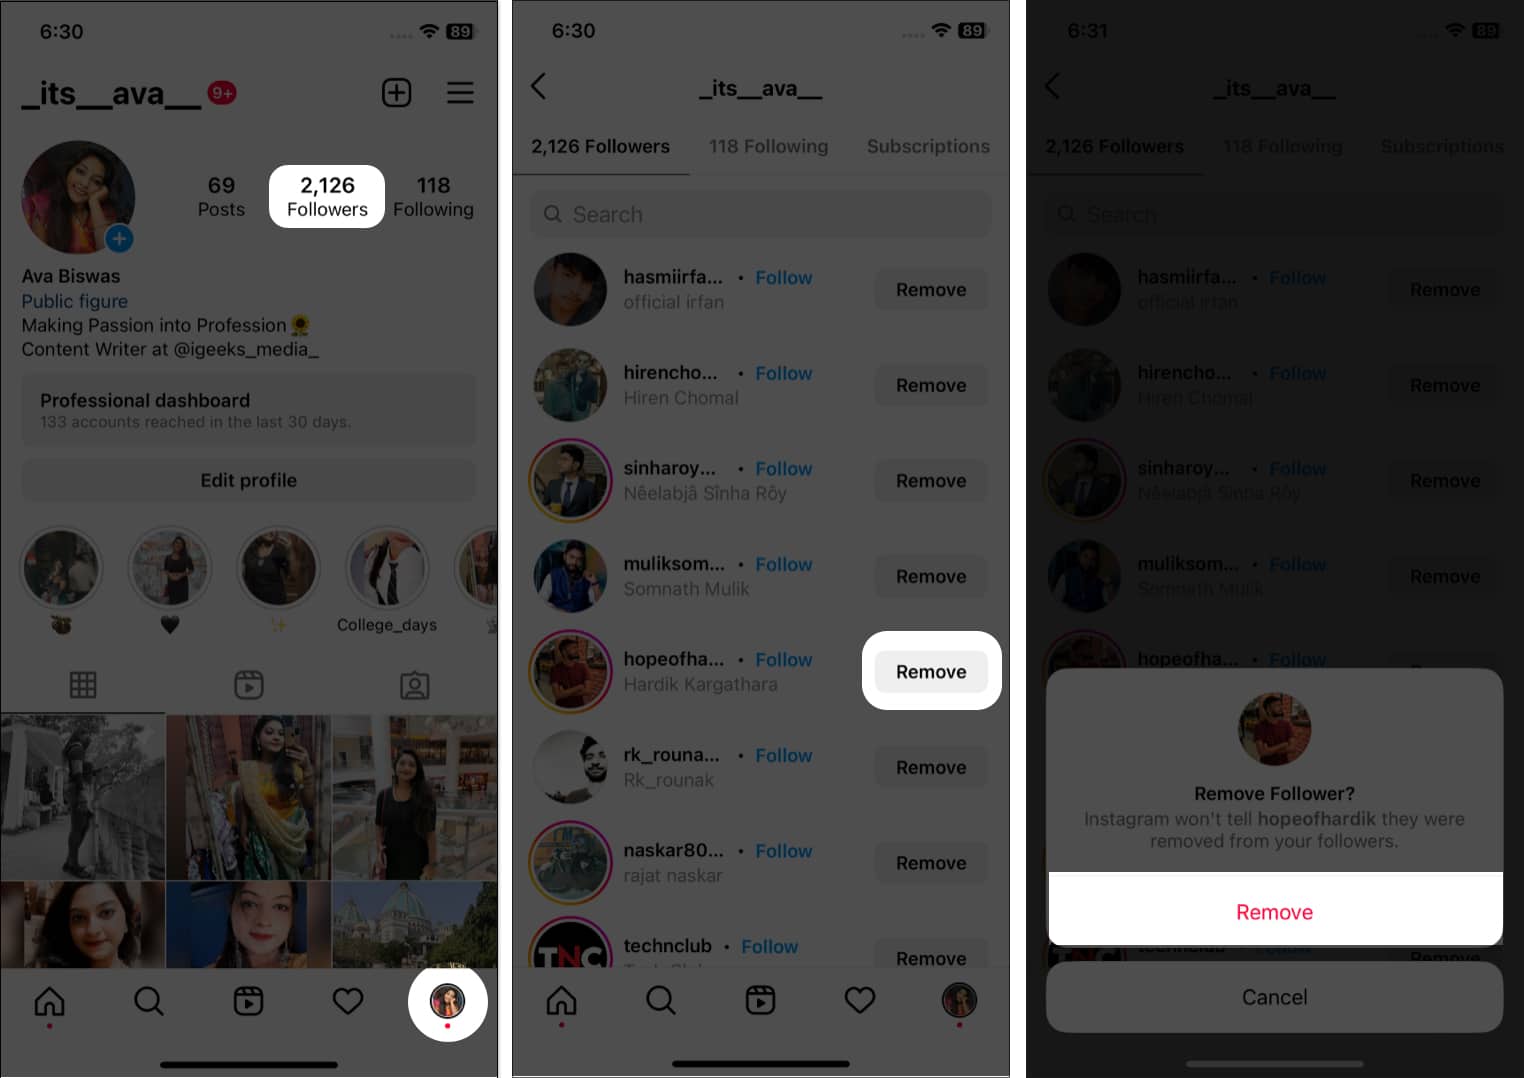 Remove a follower from the followers list on Instagram